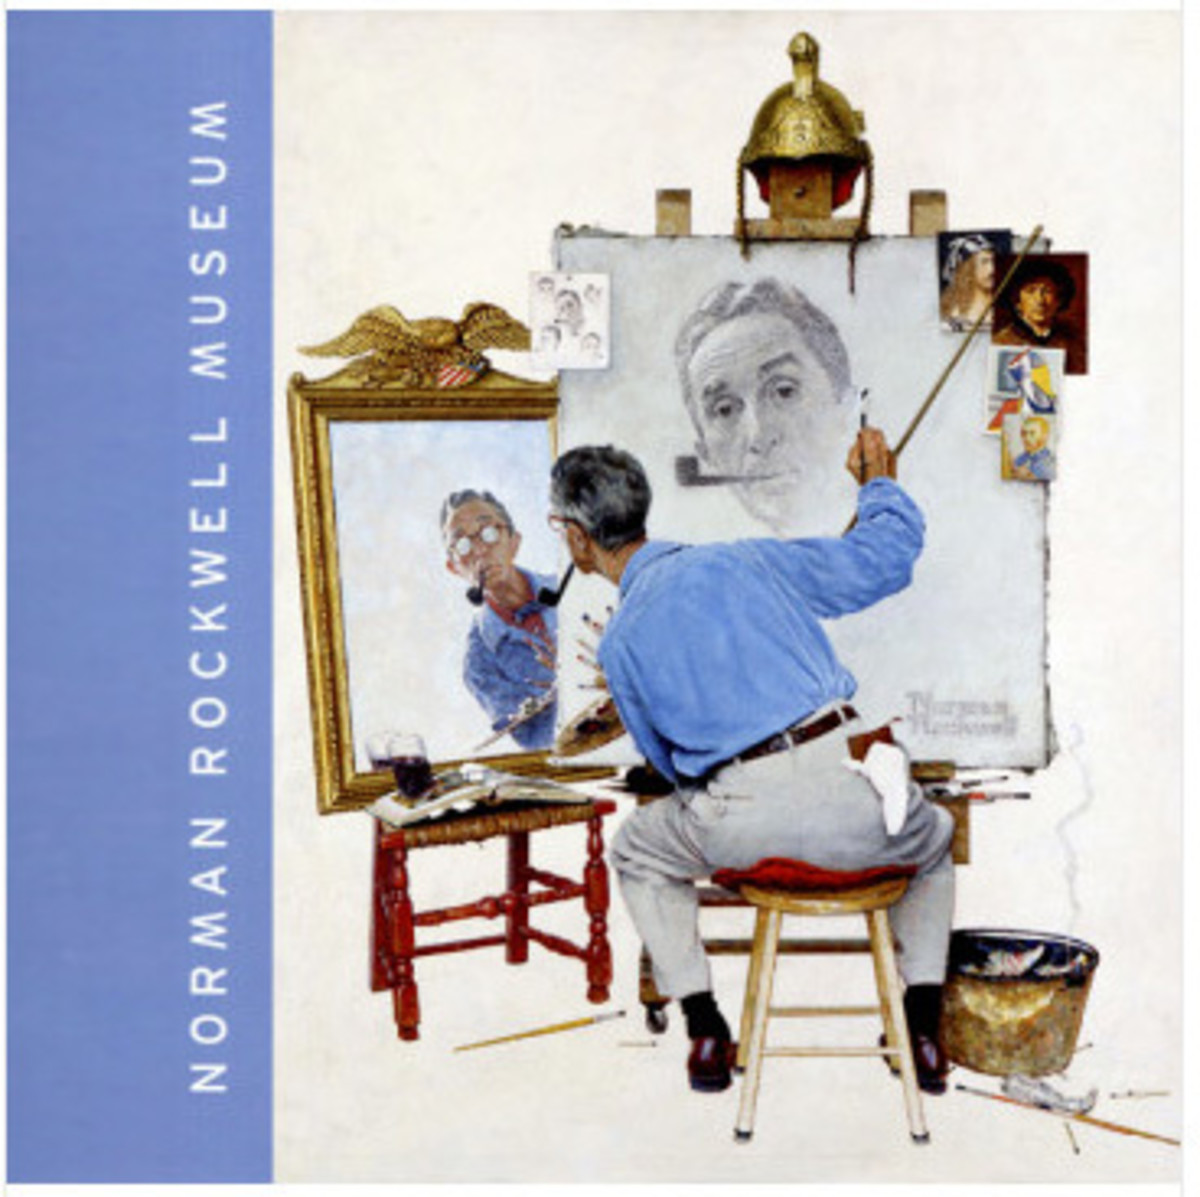 World Famous Illustrator, Norman Rockwell, the Soul of America